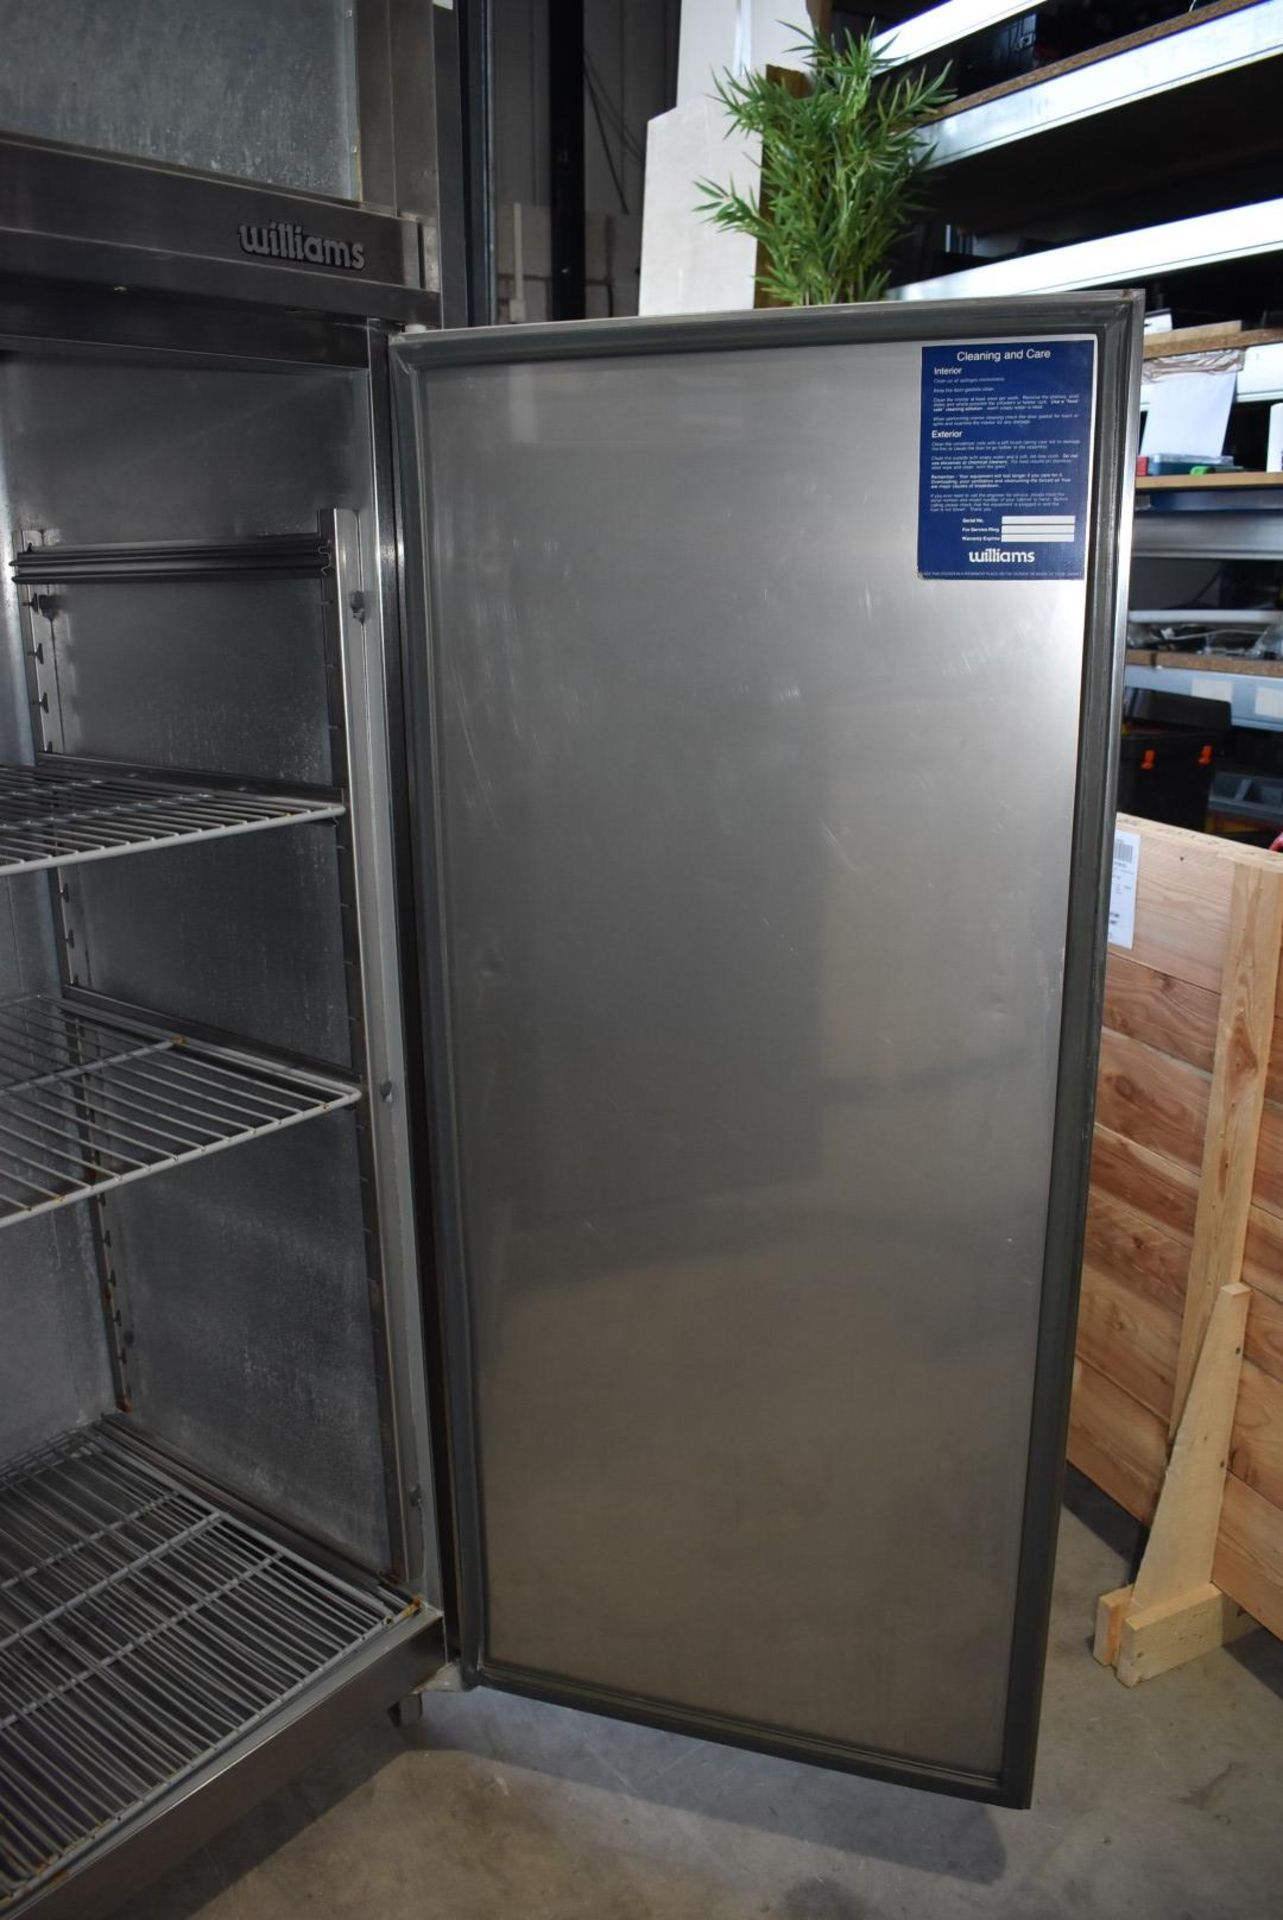 1 x Williams MJ2SA Jade Upright Double Door Refrigerator - Recently Removed From a Working - Image 2 of 9